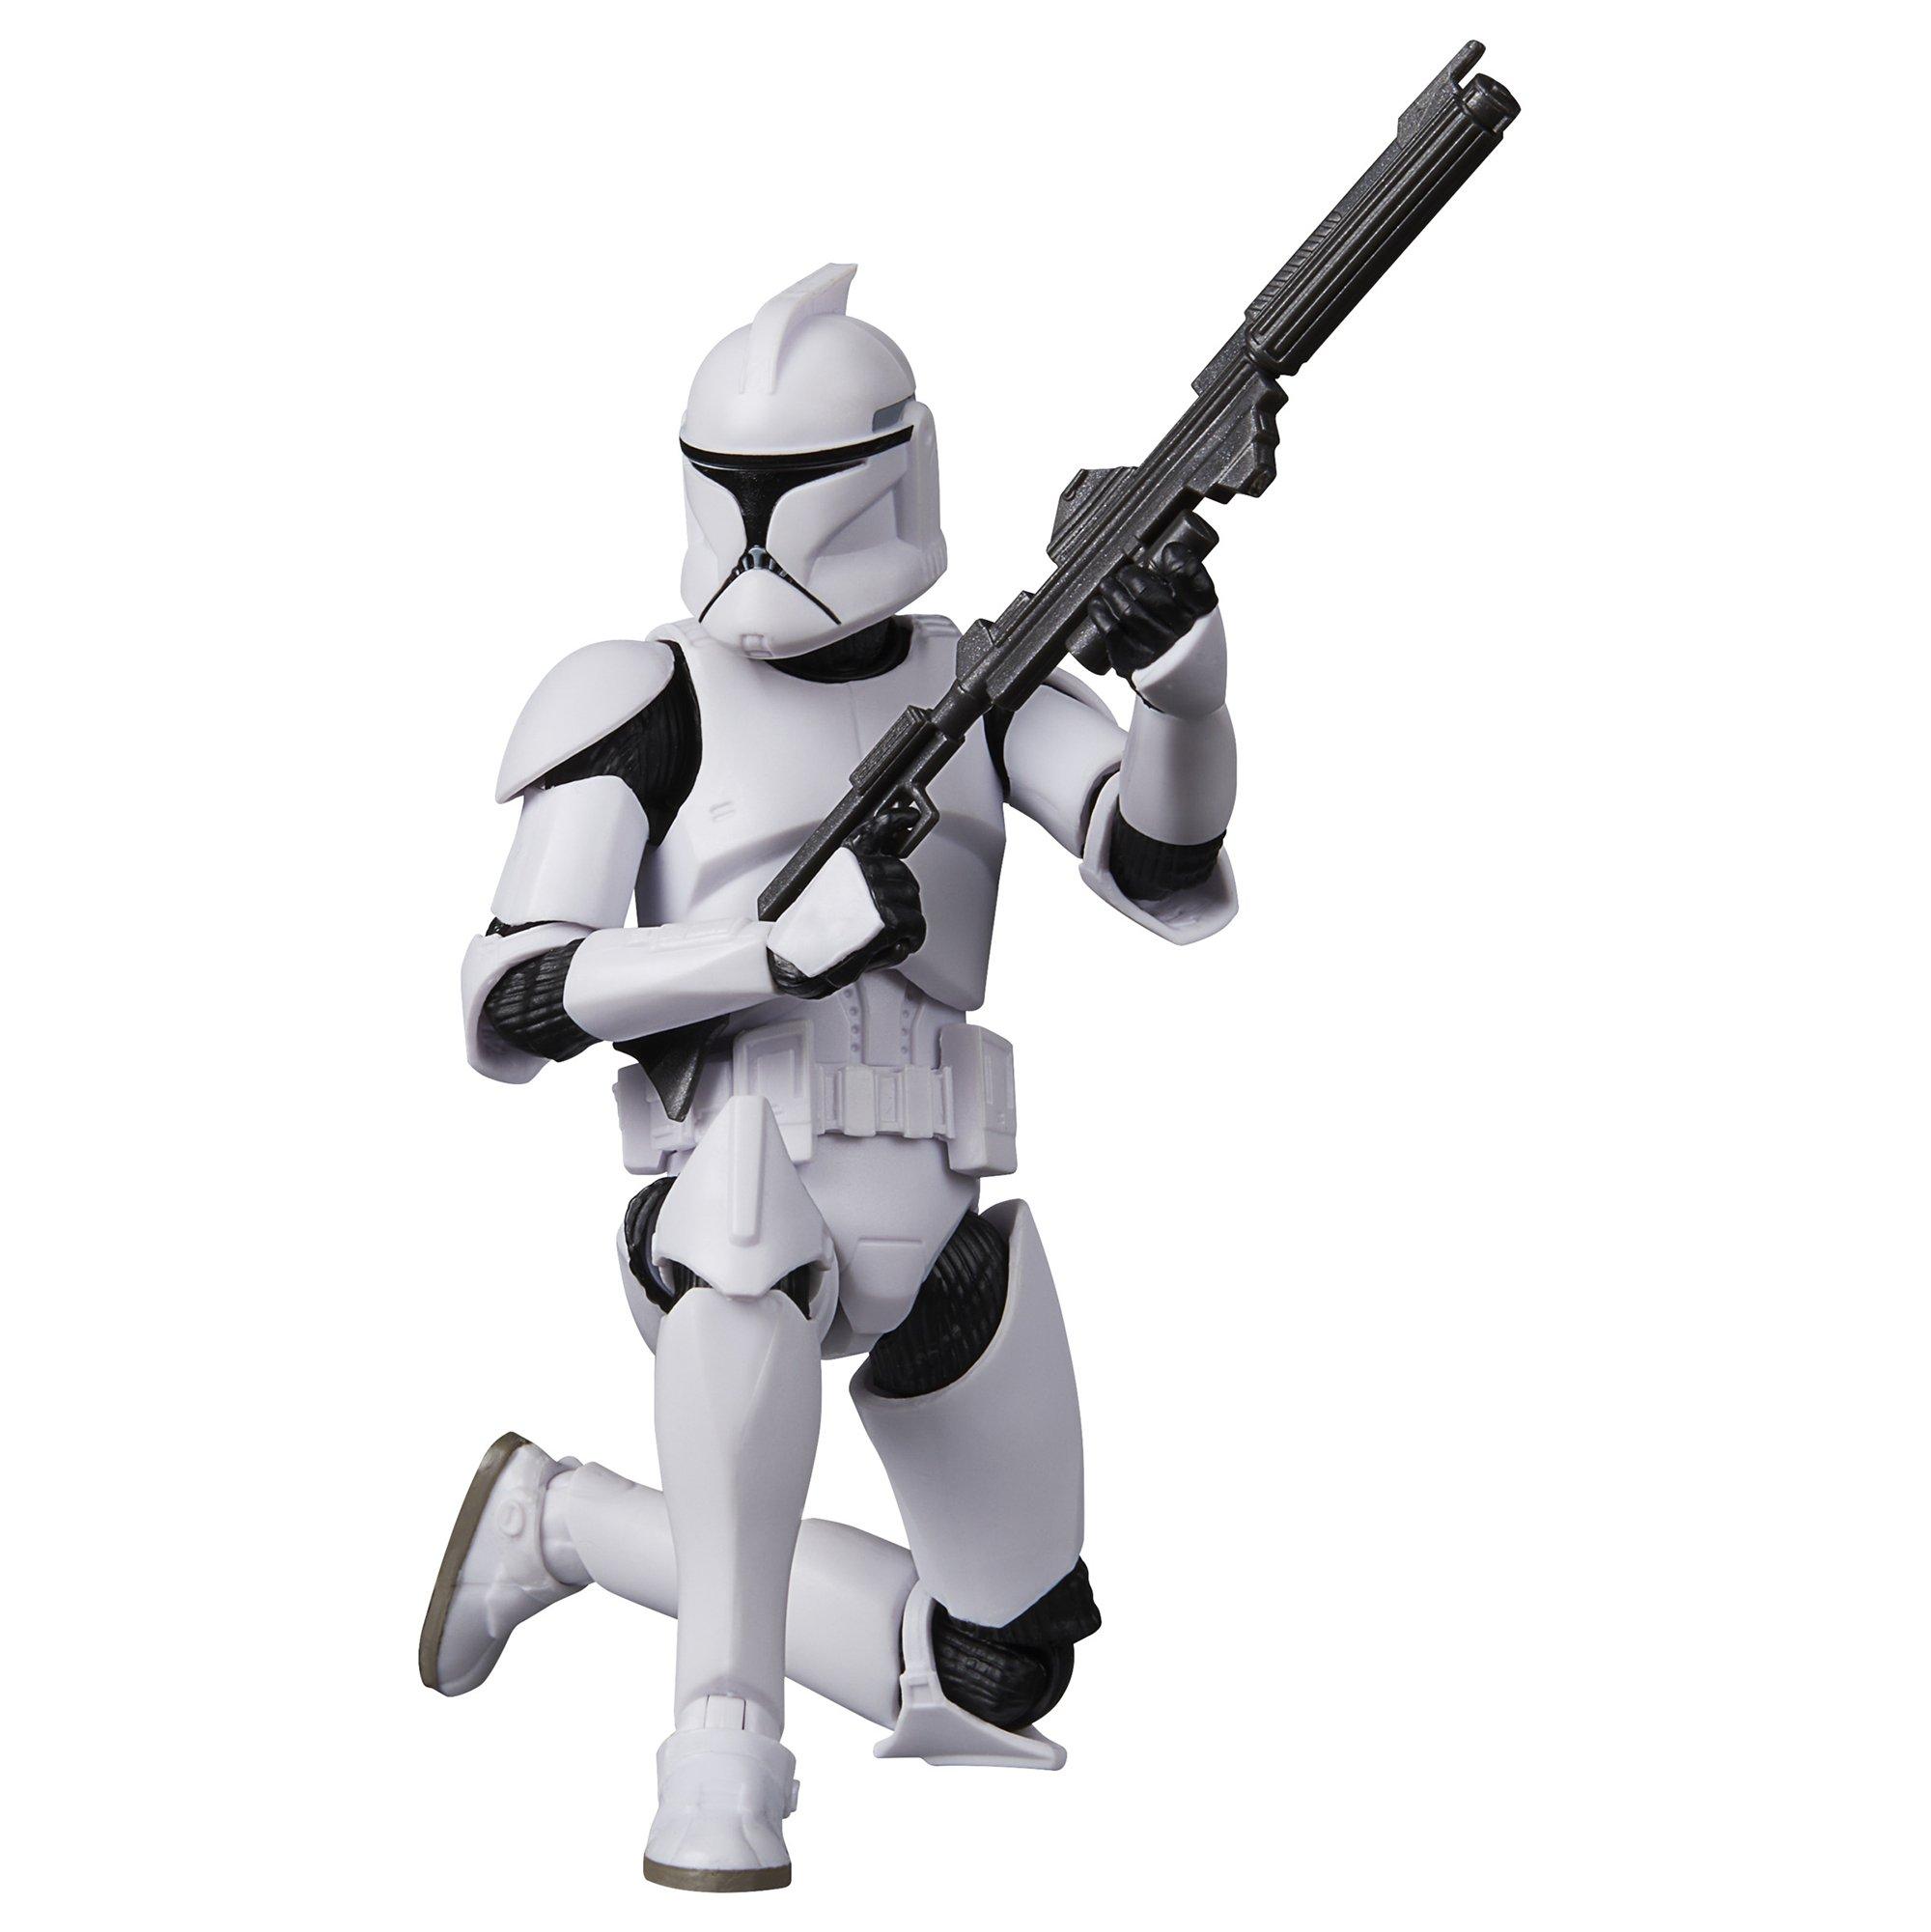 Hasbro Star Wars The Black Series Star Wars: Attack of The Clones Phase I Clone Trooper 6-in Action Figure